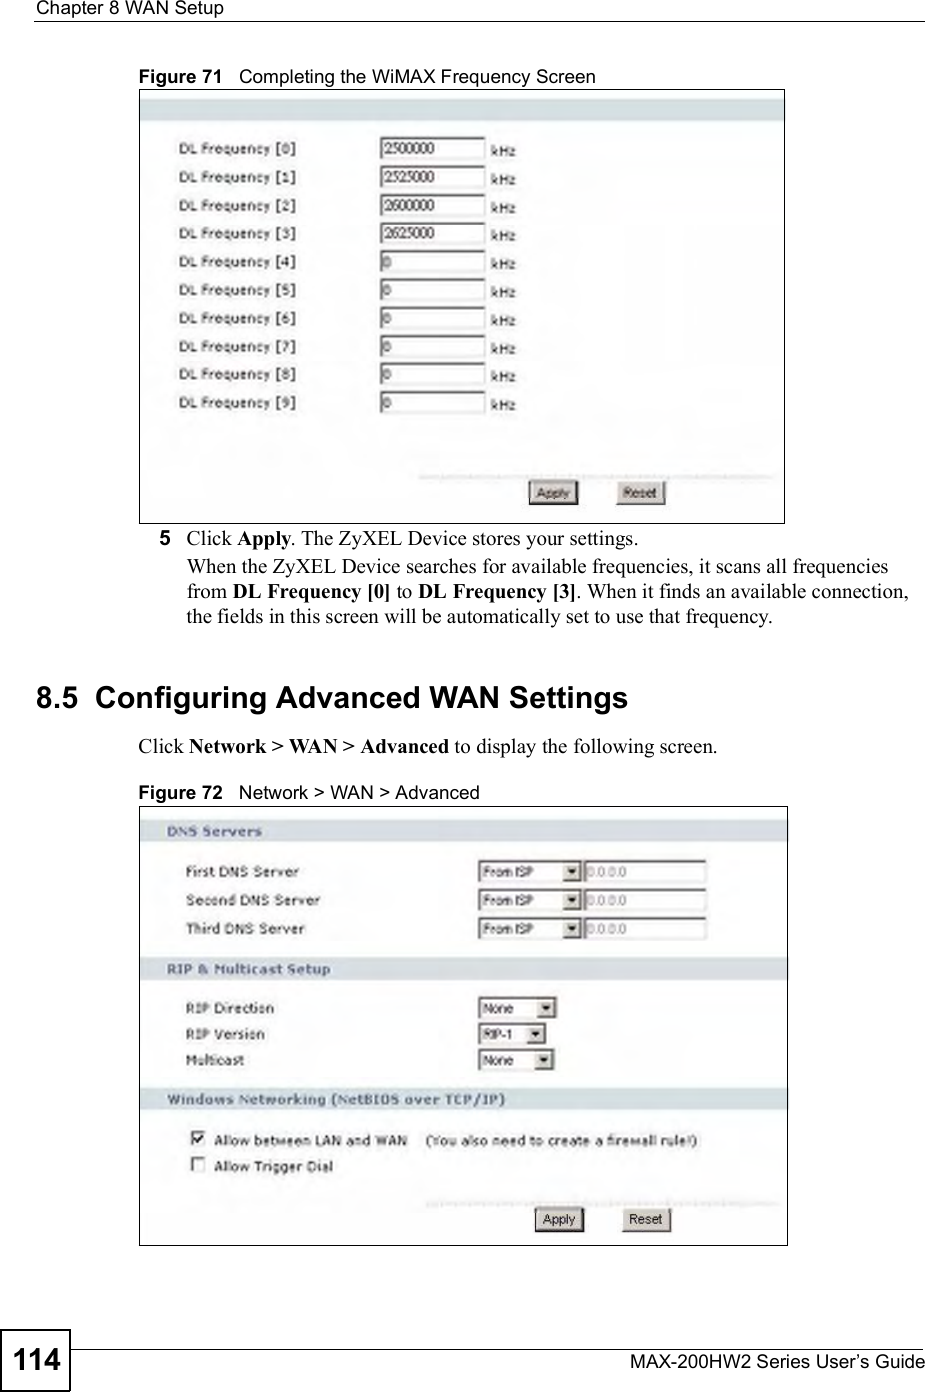 Chapter 8WAN SetupMAX-200HW2 Series User s Guide114Figure 71   Completing the WiMAX Frequency Screen5Click Apply. The ZyXEL Device stores your settings. When the ZyXEL Device searches for available frequencies, it scans all frequencies from DL Frequency [0] to DL Frequency [3]. When it finds an available connection, the fields in this screen will be automatically set to use that frequency.8.5  Configuring Advanced WAN SettingsClick Network &gt; WAN &gt; Advanced to display the following screen.Figure 72   Network &gt; WAN &gt; Advanced